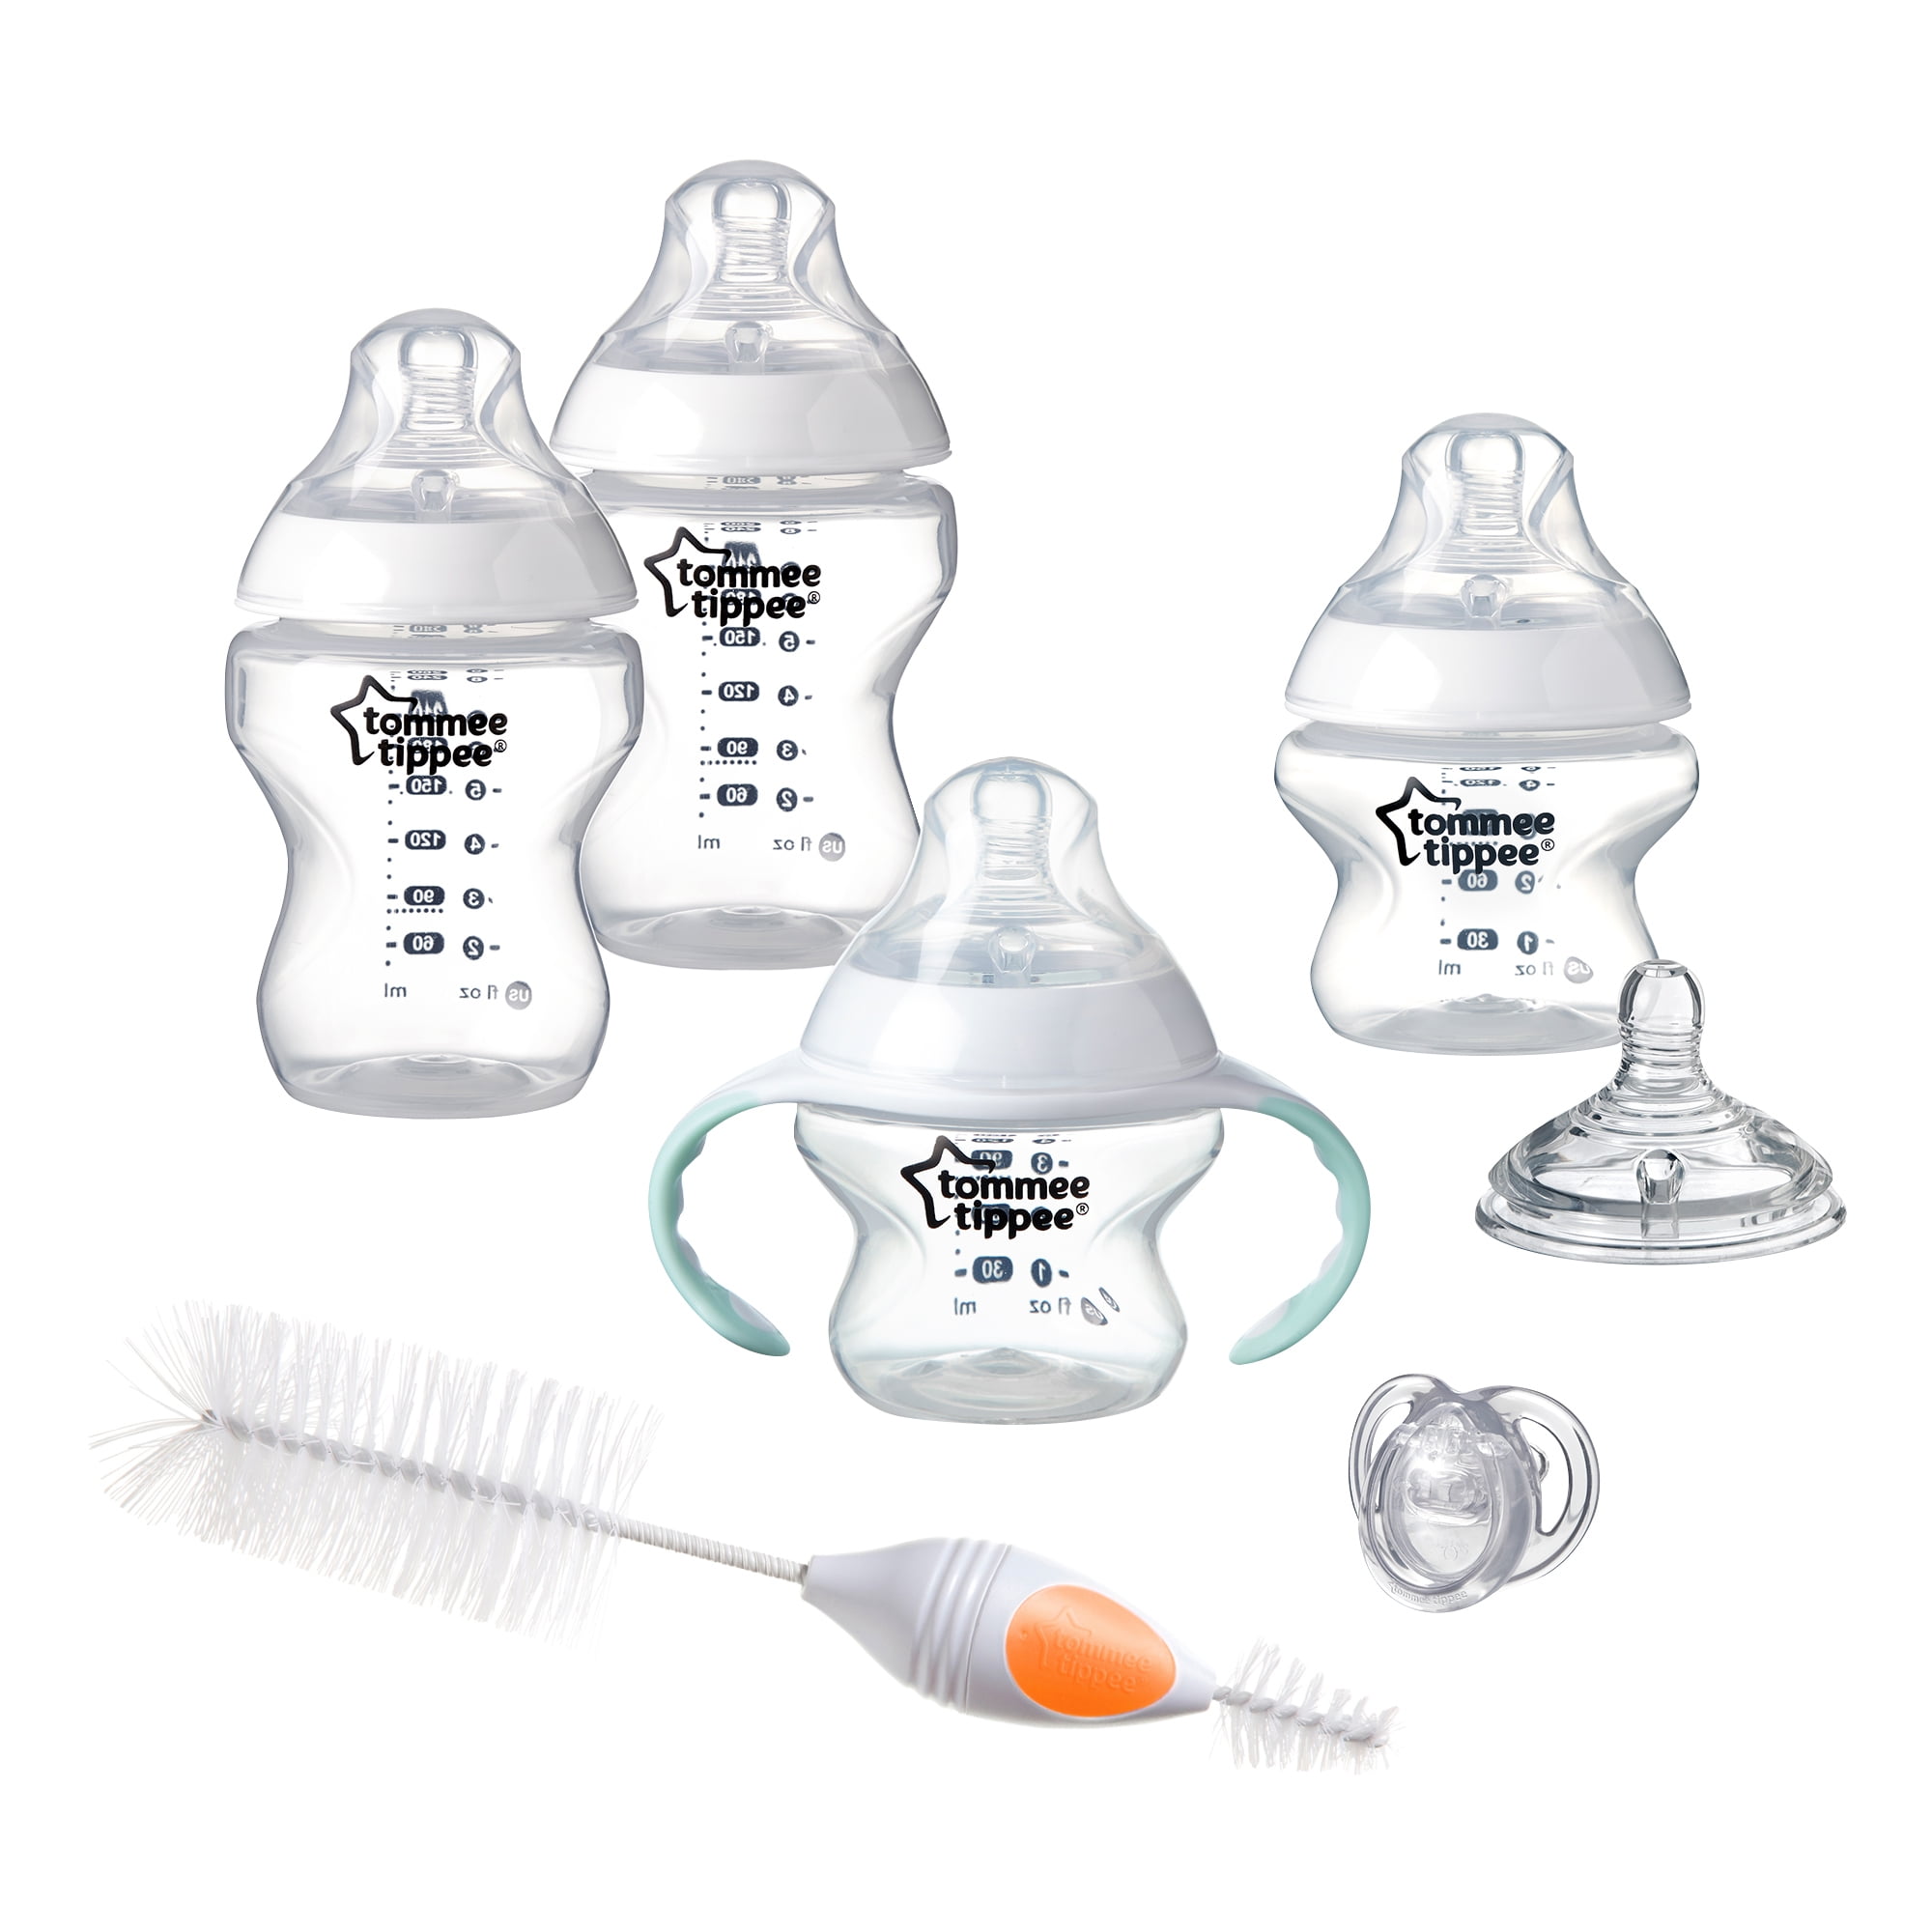 Tommee Tippee Closer to Nature Newborn Baby Bottle Starter Set   Breast-Like Nipple, Anti-Colic Valve - Clear, Unisex 